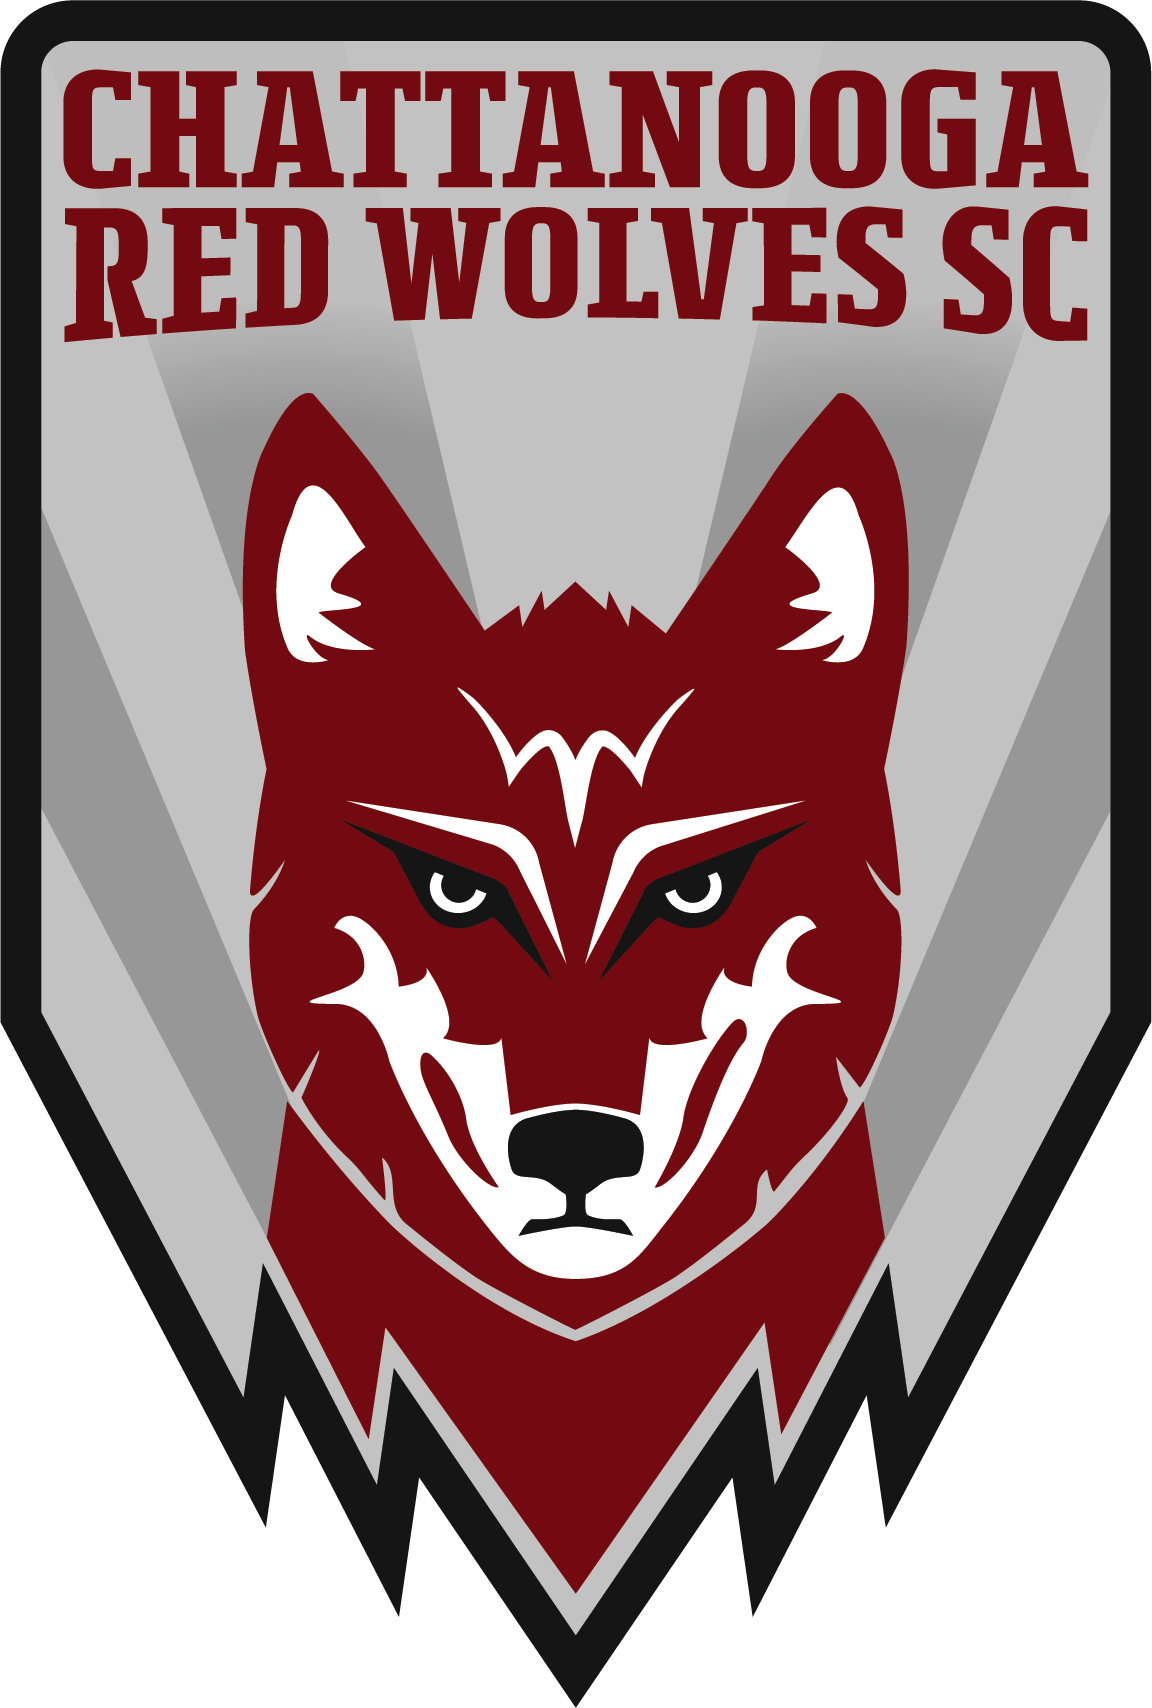 chattanooga-red-wolves-soccer-club.square.site